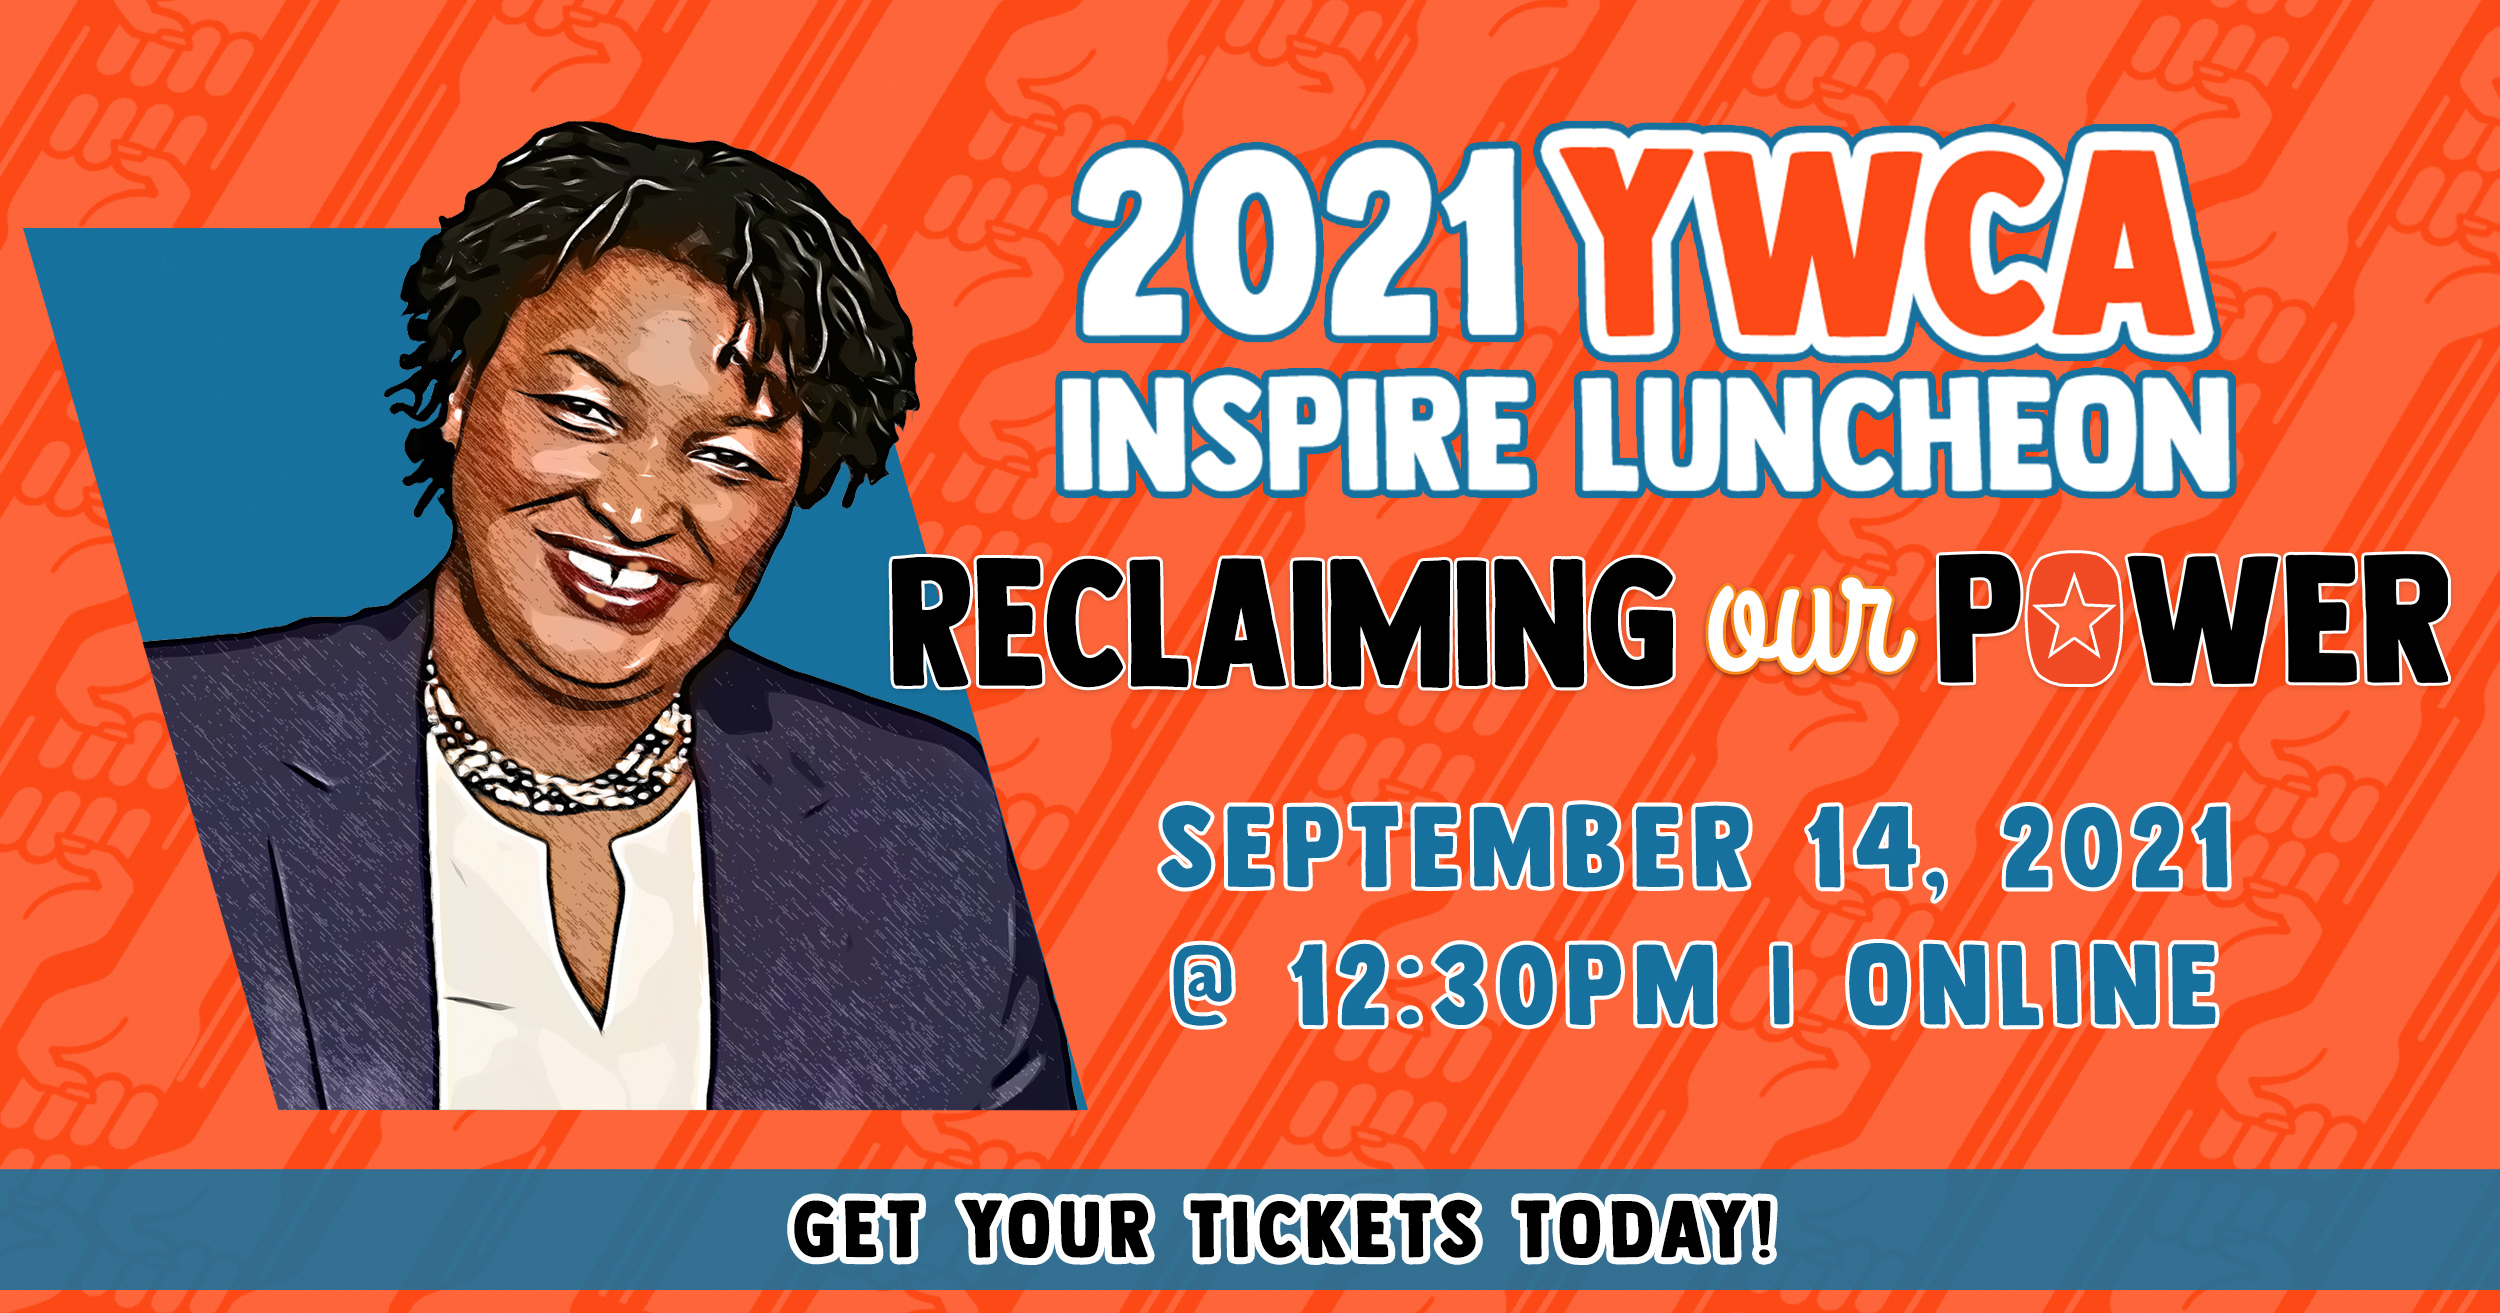 Stacey Abrams appears above the words 2021 YWCA Inspire Luncheon: Reclaiming our Power September 14